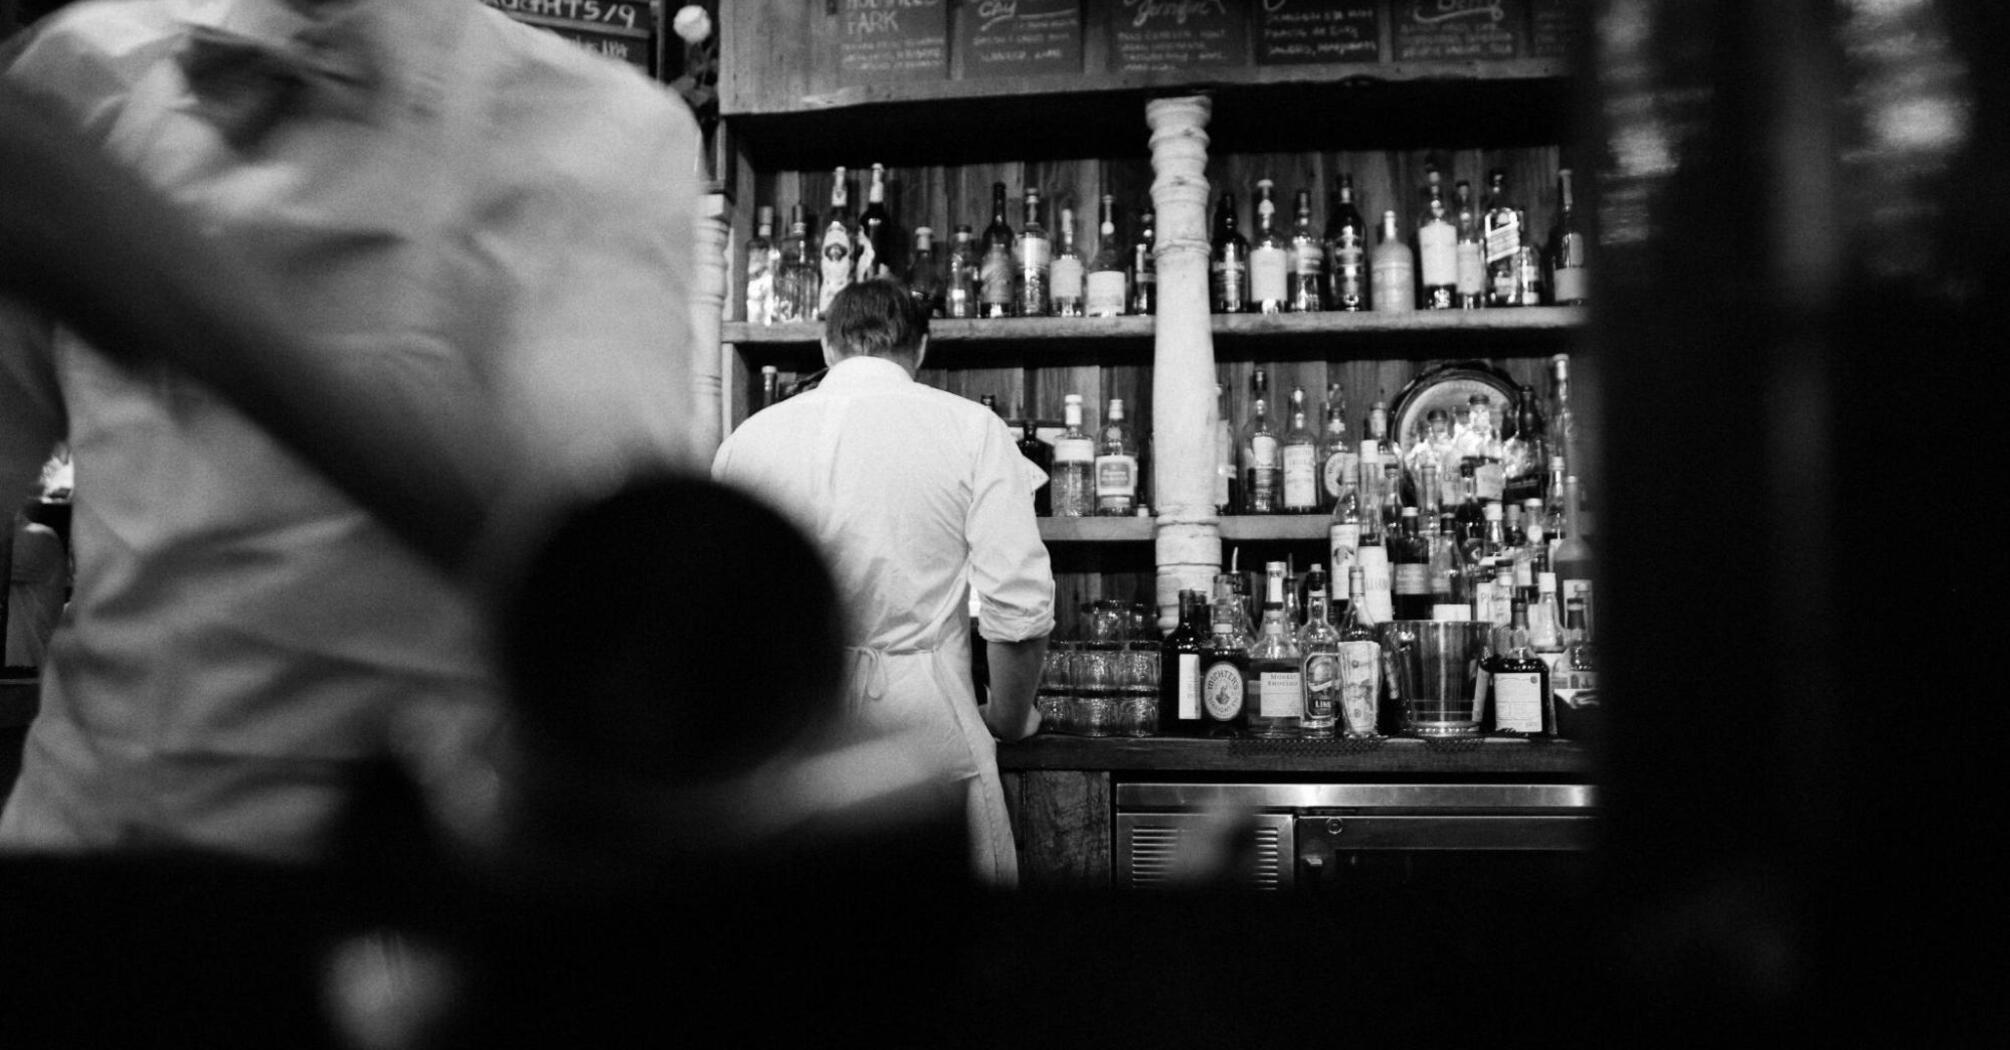 Process of preparing cocktails by a waiter